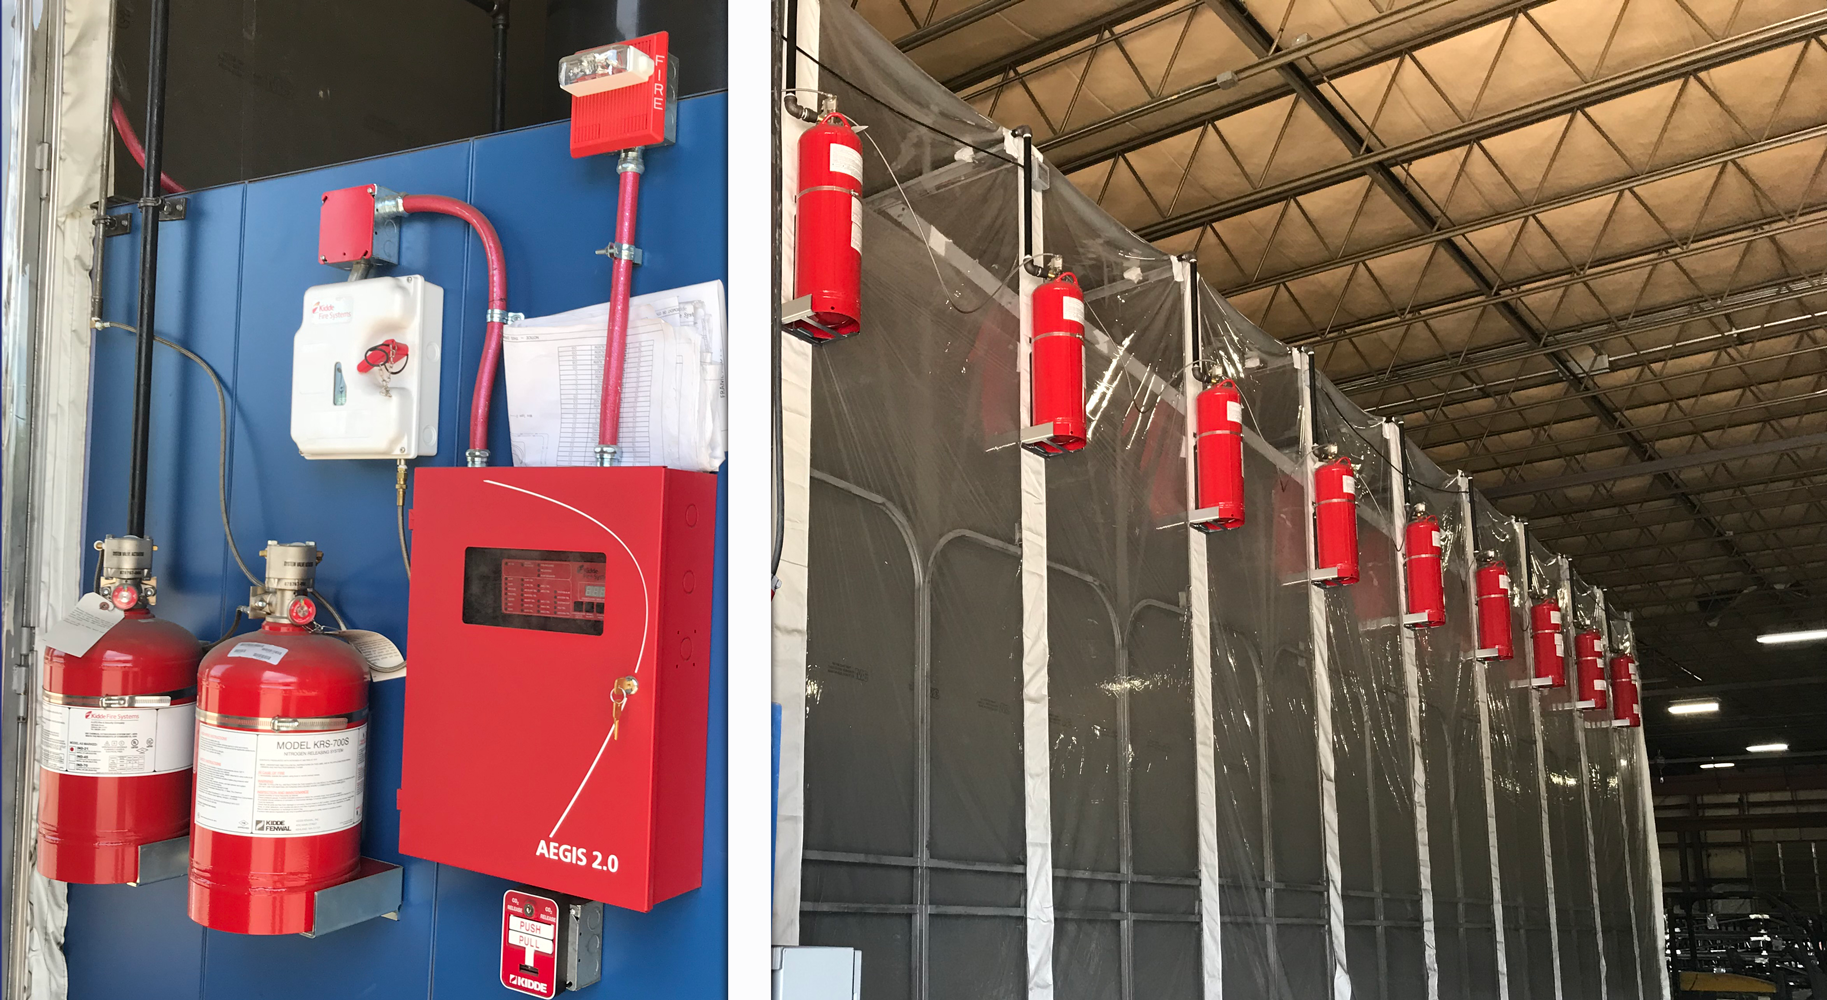 Kidde Dry Chemical Fire Suppression System Install